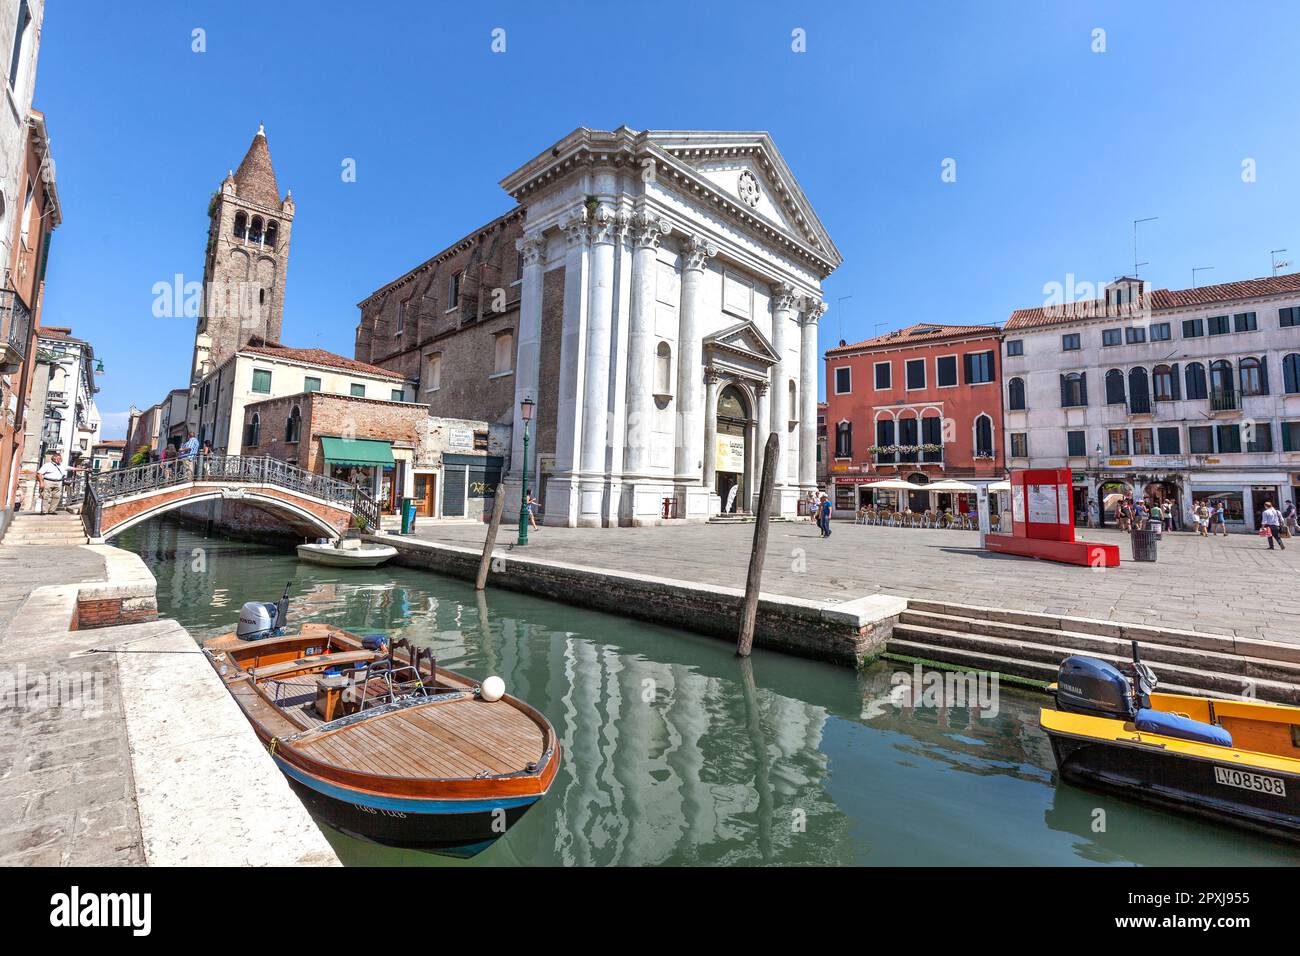 Boats on Rio de San Barnaba canal with Fondamenta Alberti (left) and St Barnabas bridge with Church of St Barnabas and bell tower, Dorsoduro, Venice Stock Photo